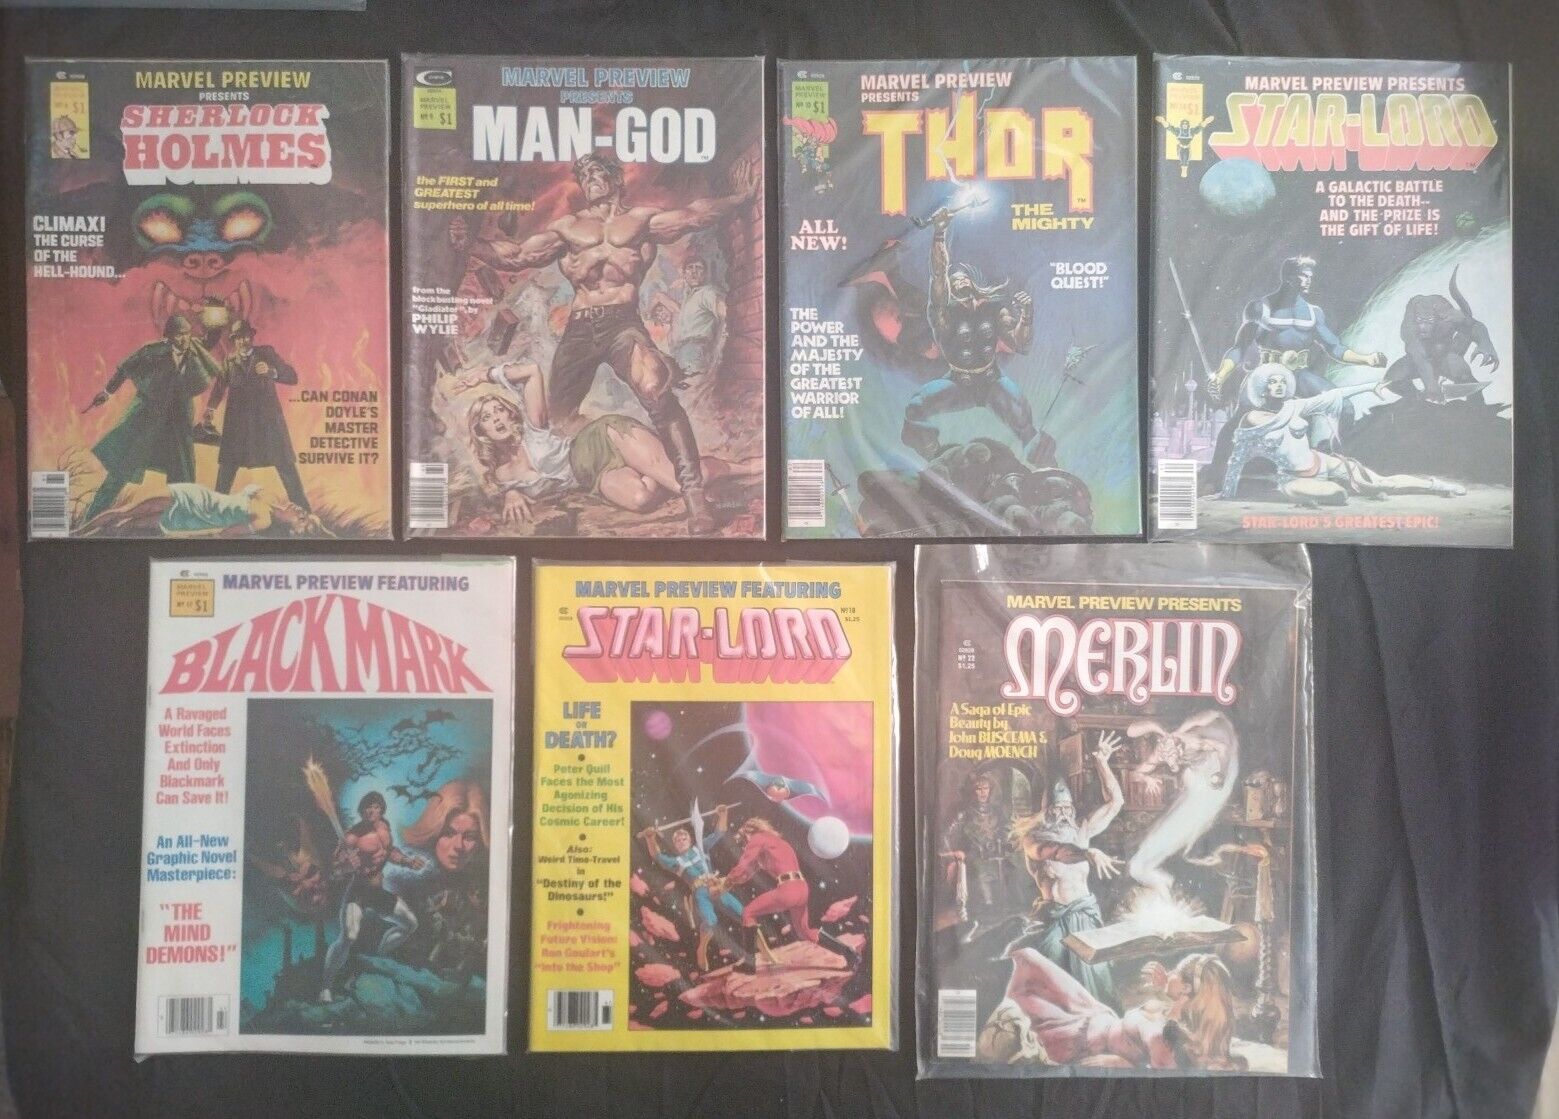 Marvel Preview 14,15 Starlord, 6 Holmes, 22 Merlin, 10 Thor, Man-God, Black Mark